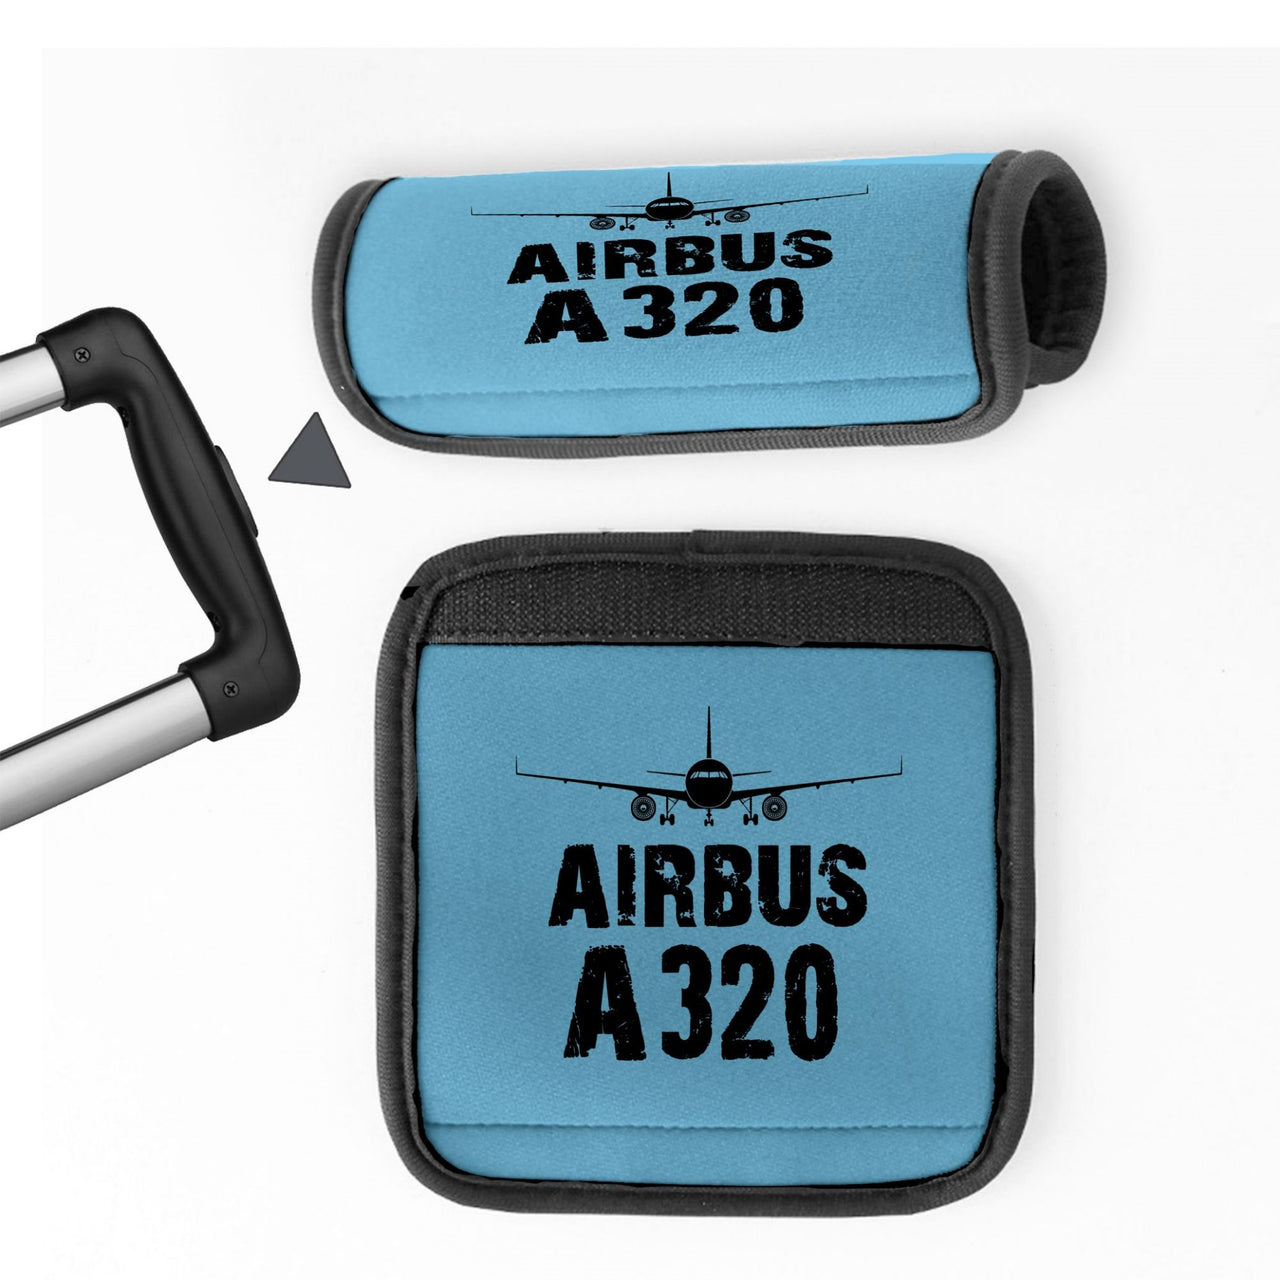 Airbus A320 & Plane Designed Neoprene Luggage Handle Covers